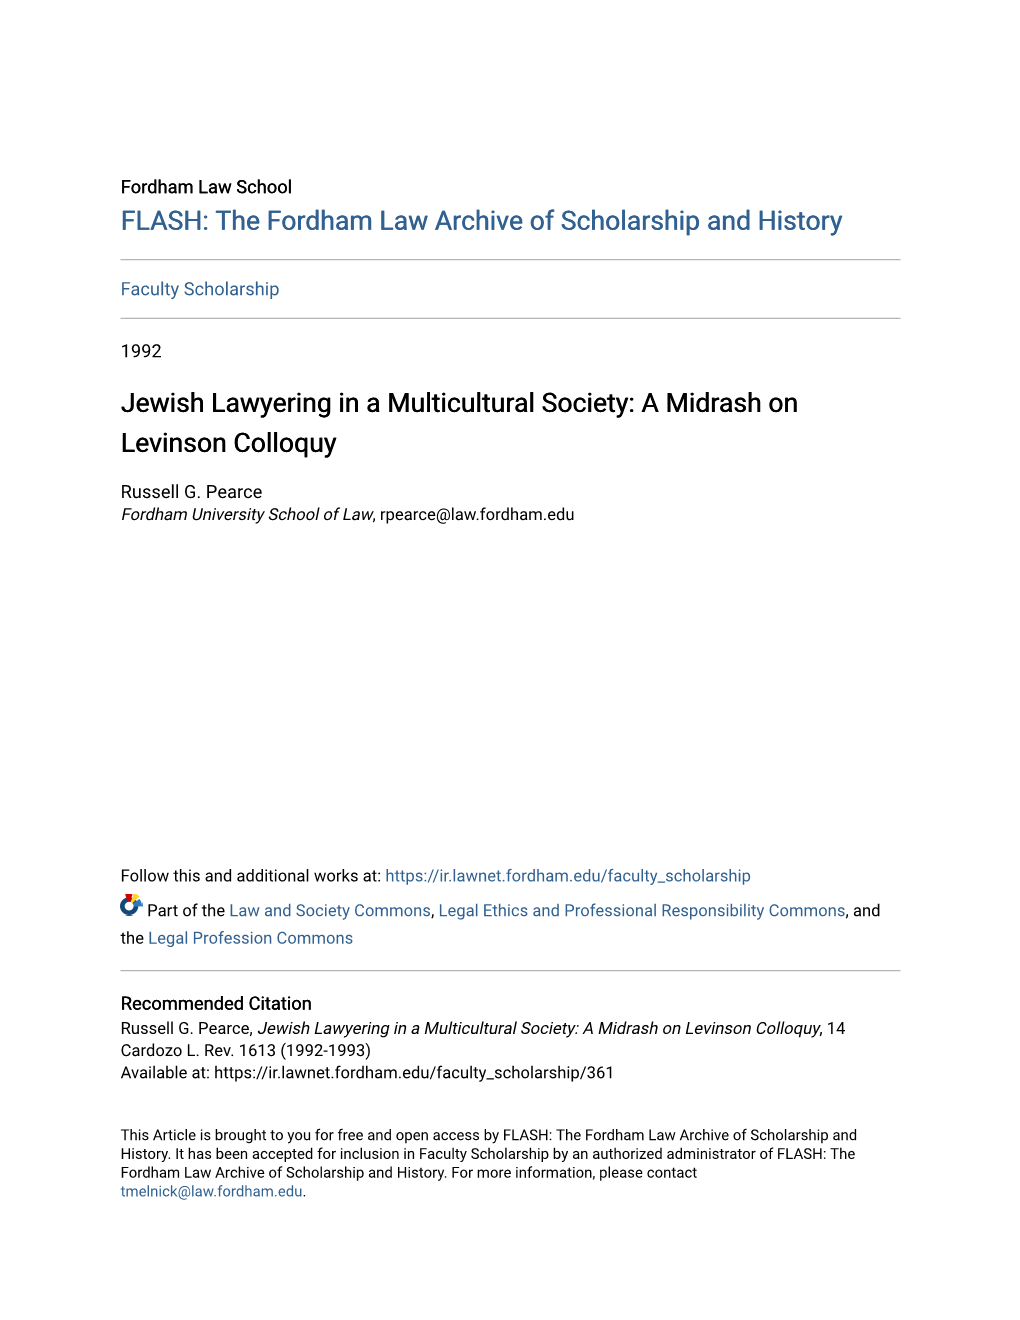 Jewish Lawyering in a Multicultural Society: a Midrash on Levinson Colloquy